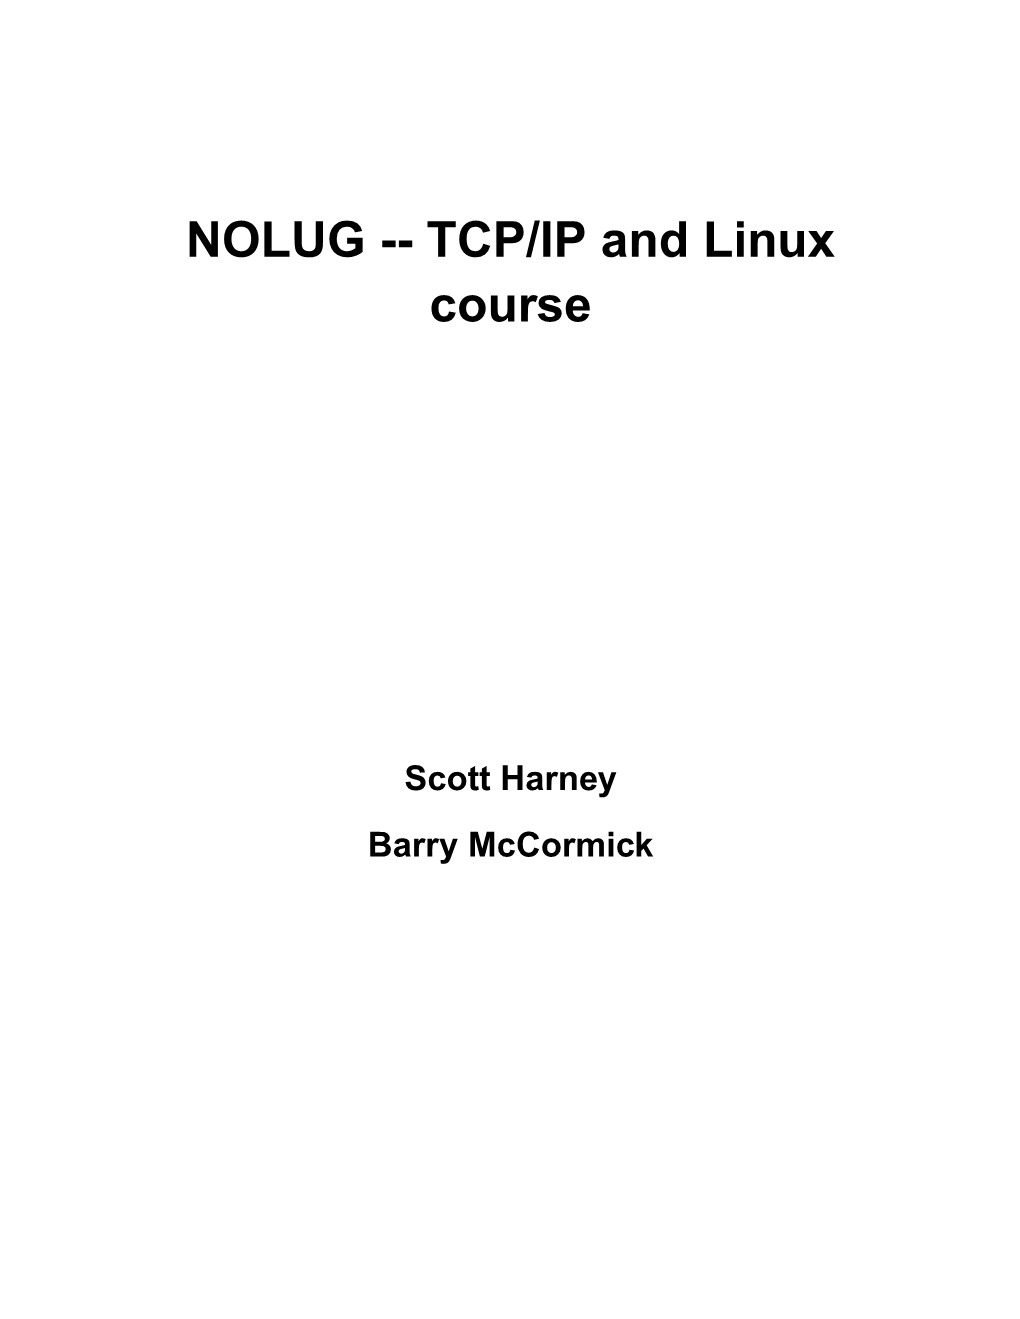 TCP/IP and Linux Course